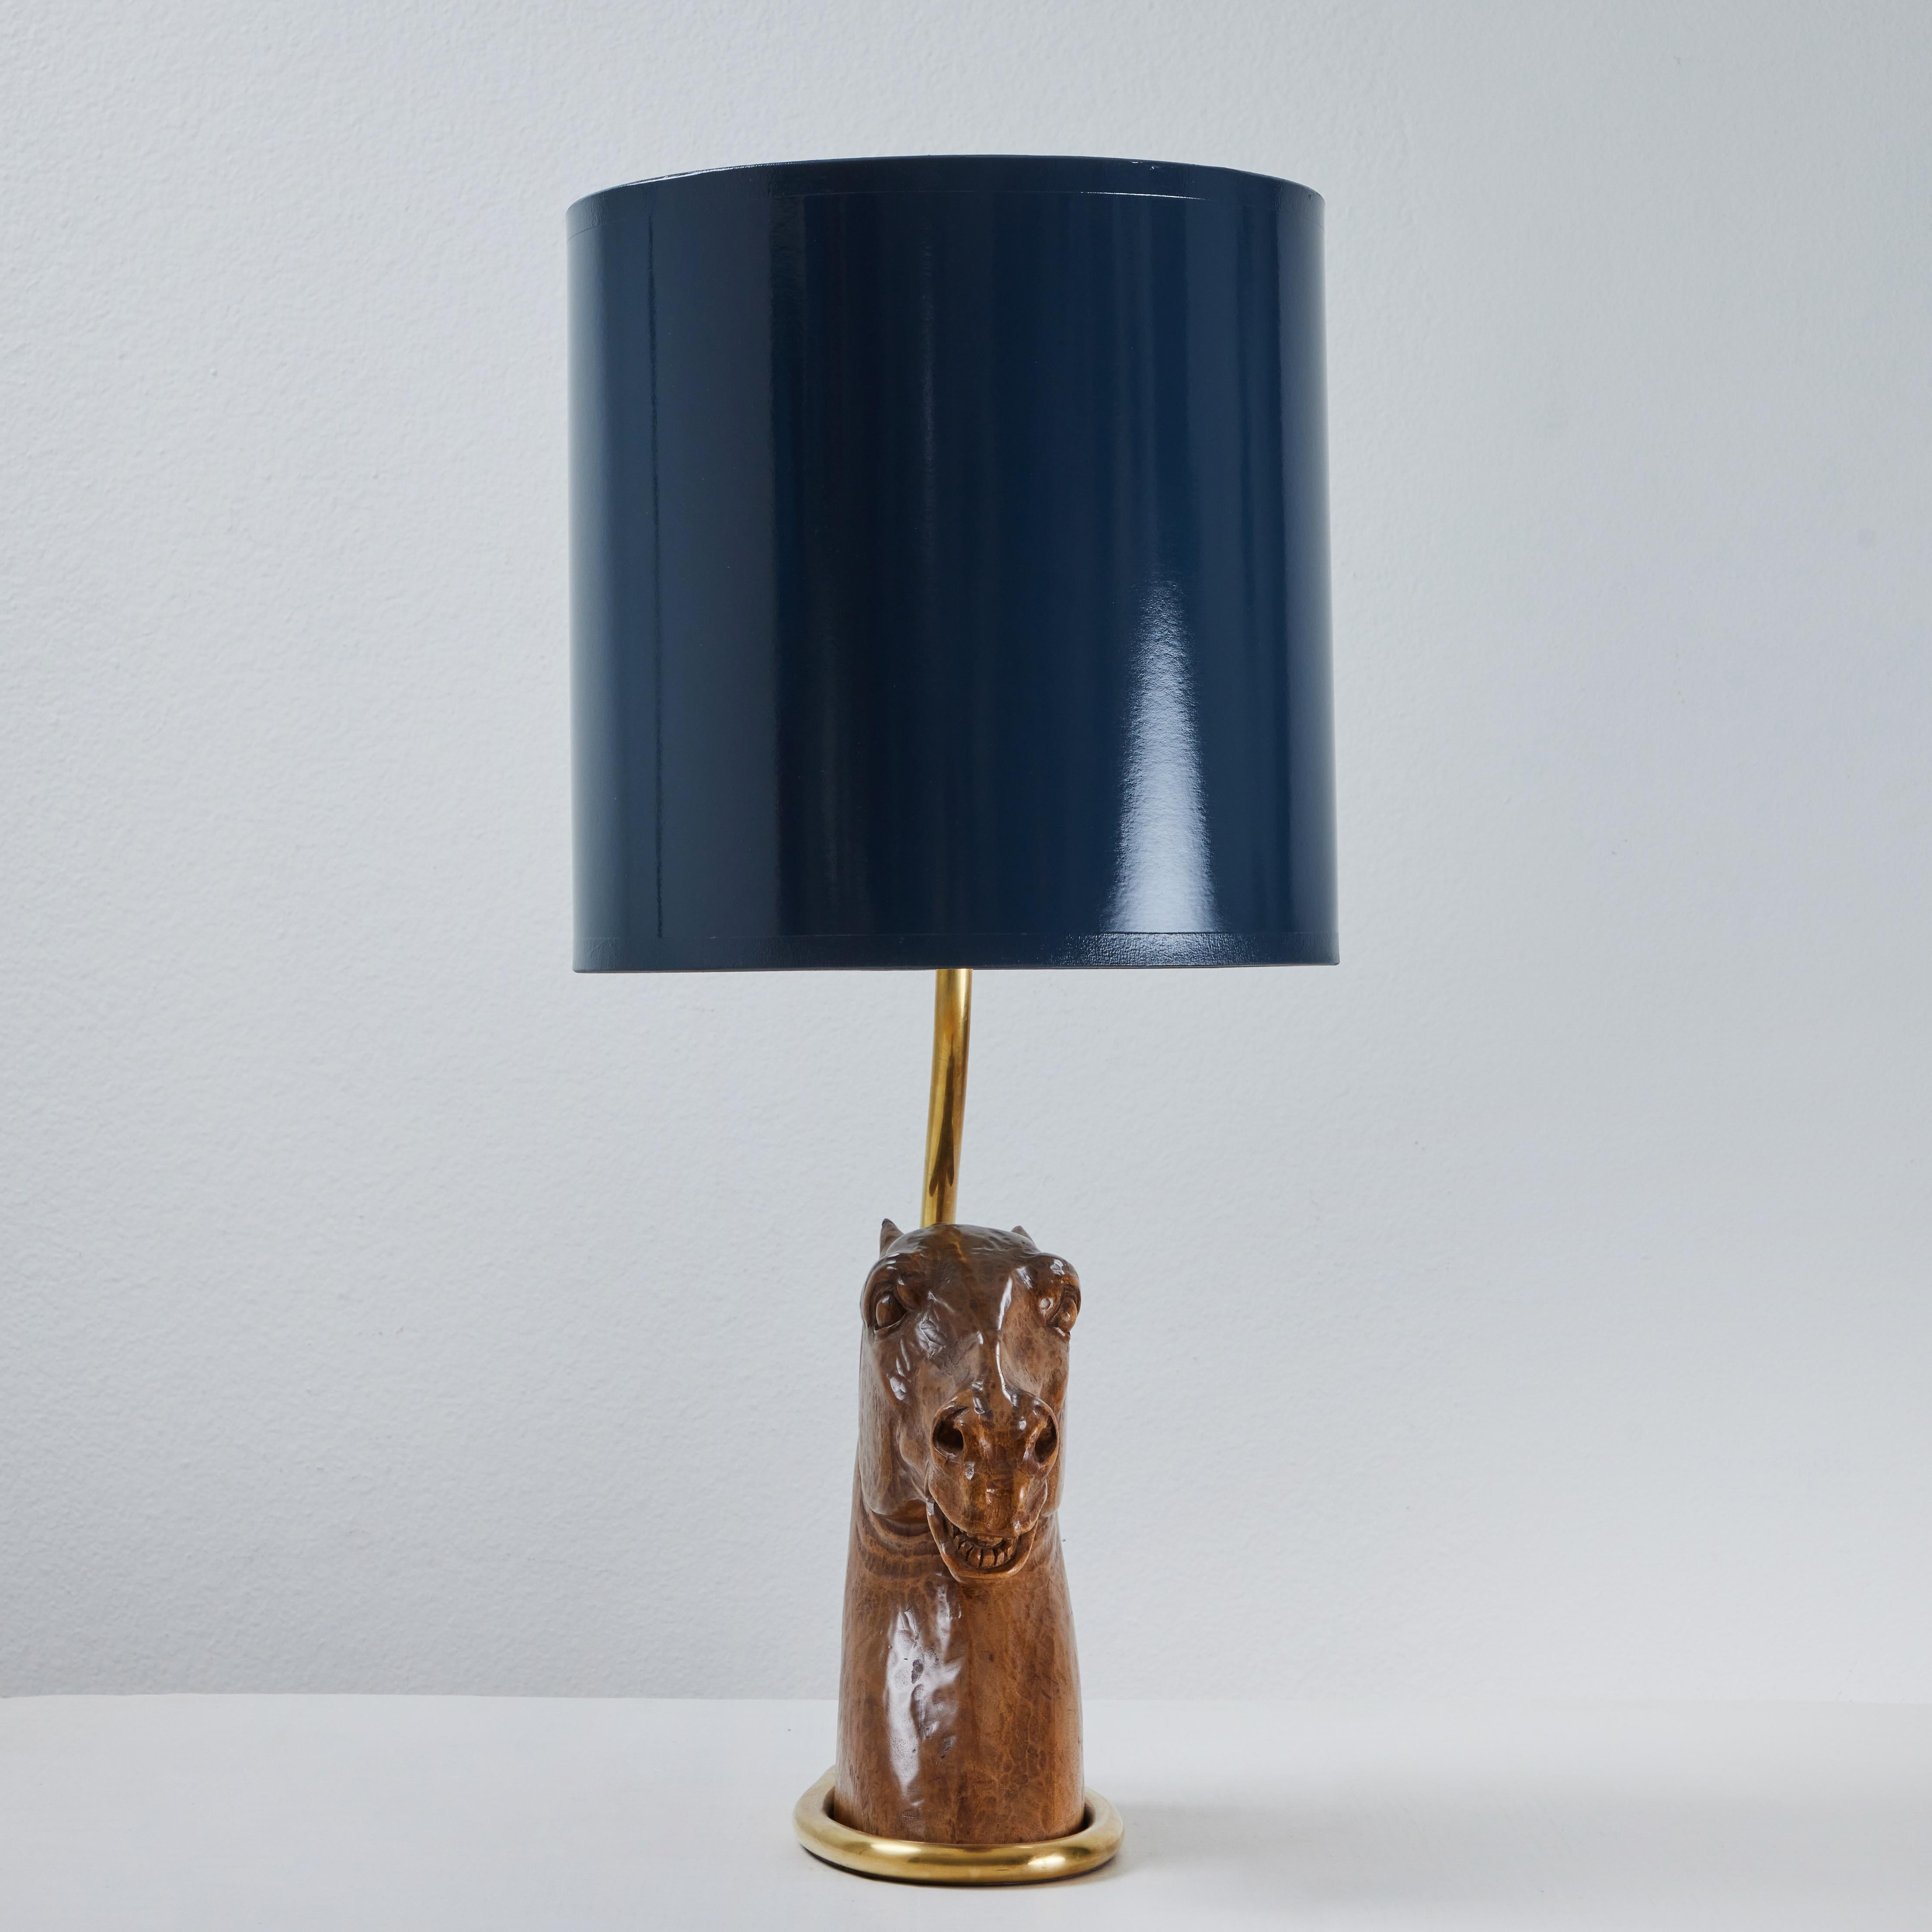 Carved Horse Bust Table Lamp, Signed Gucci, 1970s For Sale